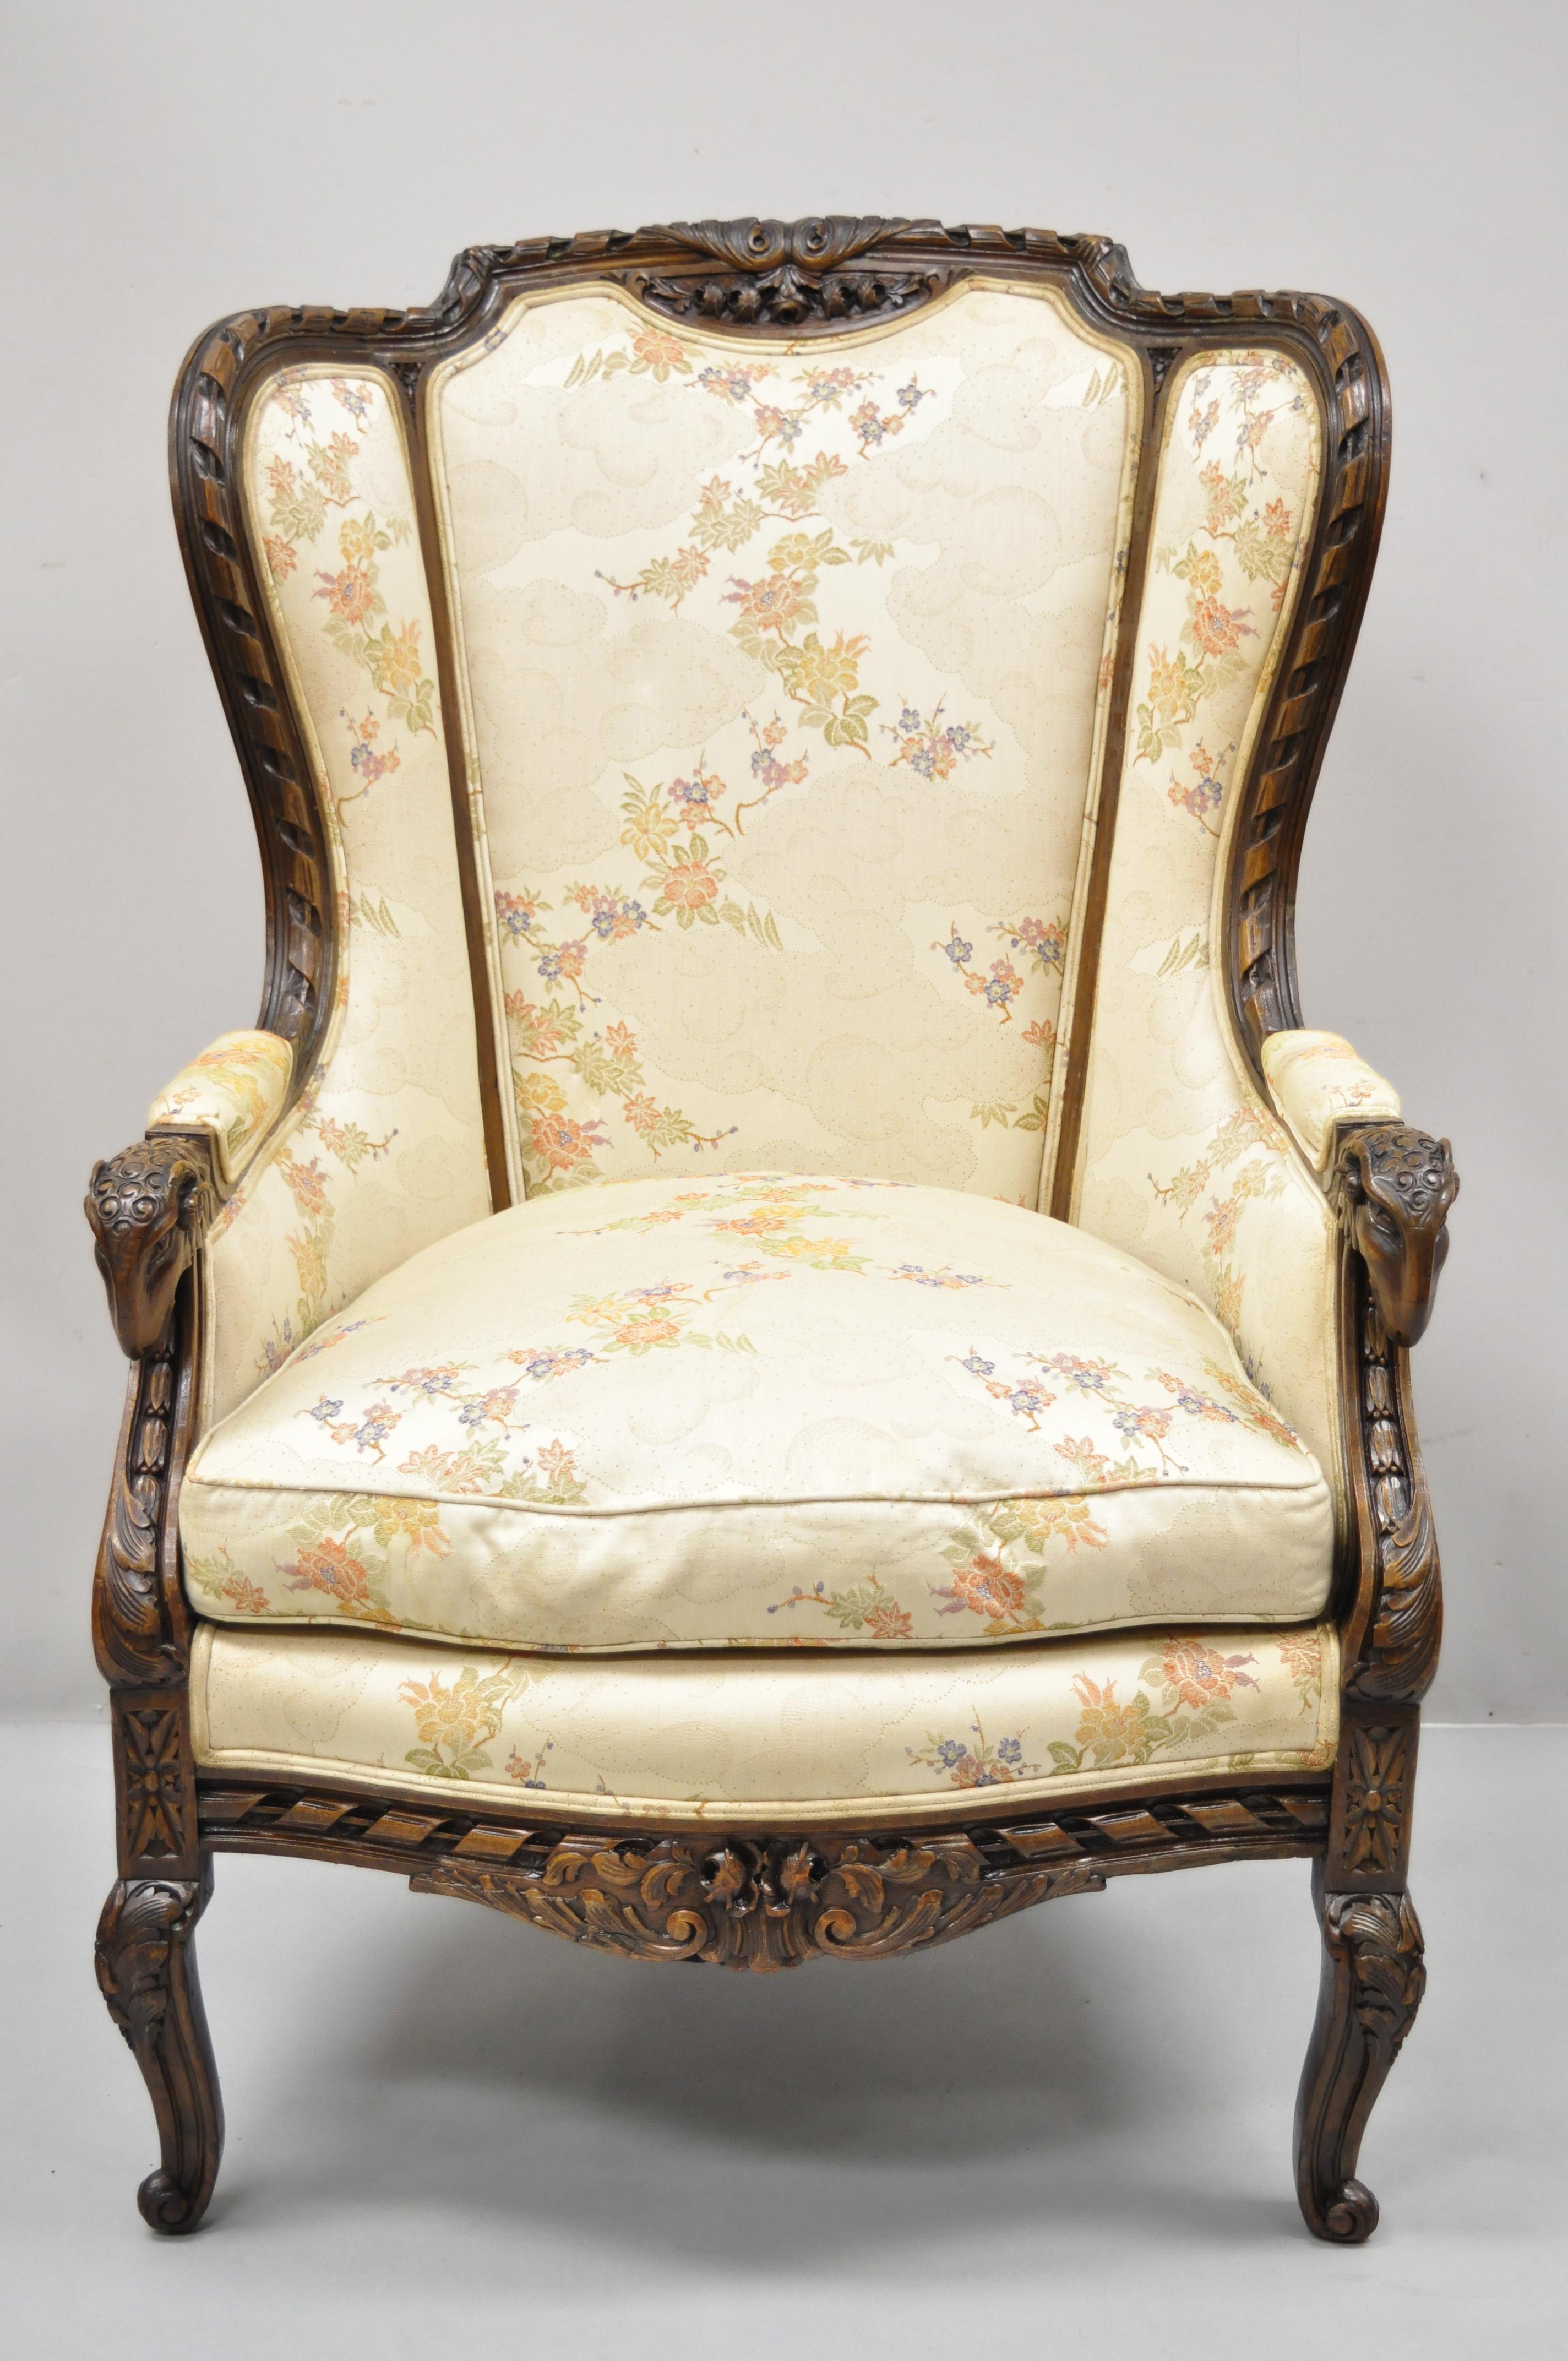 Vintage Italian Regency style rams head carved walnut wingback bergere arm chair. Item features ram's head carved armrests, solid wood frame, upholstered armrests, finely carved details, cabriole legs, very nice vintage item, great style and form.